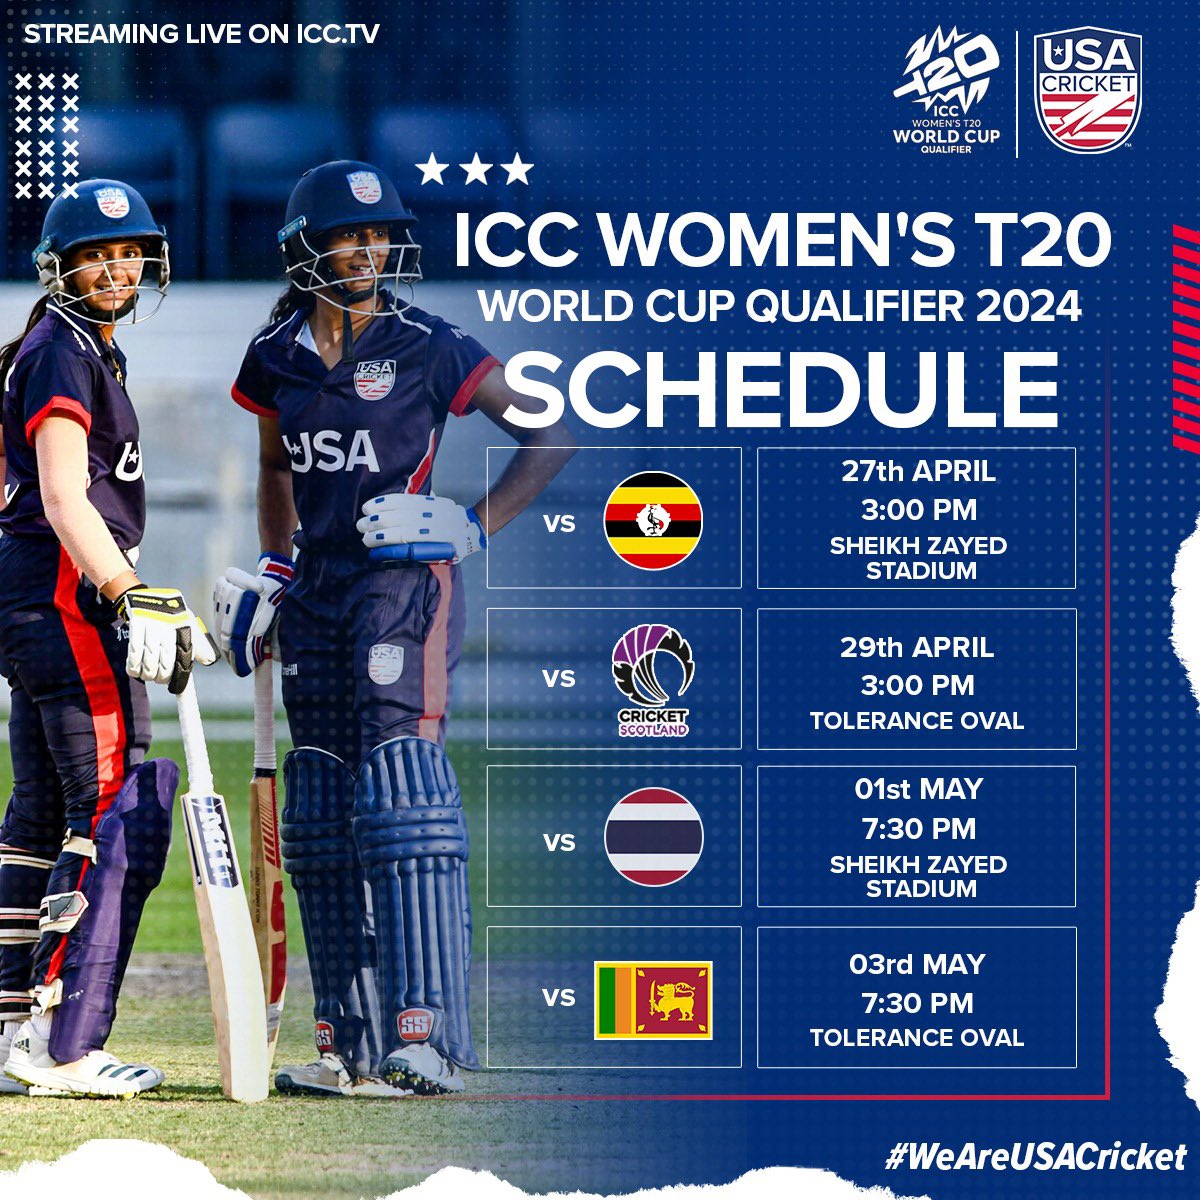 USA’s @ICC Women’s #T20WorldCup Qualifier campaign begins April 27th against Uganda! 🏏

🗓️ Apr 27- May 3rd
4️⃣ Matches
📍Abu Dhabi
📺 ICC.tv 

#WeAreUSACricket 🇺🇸